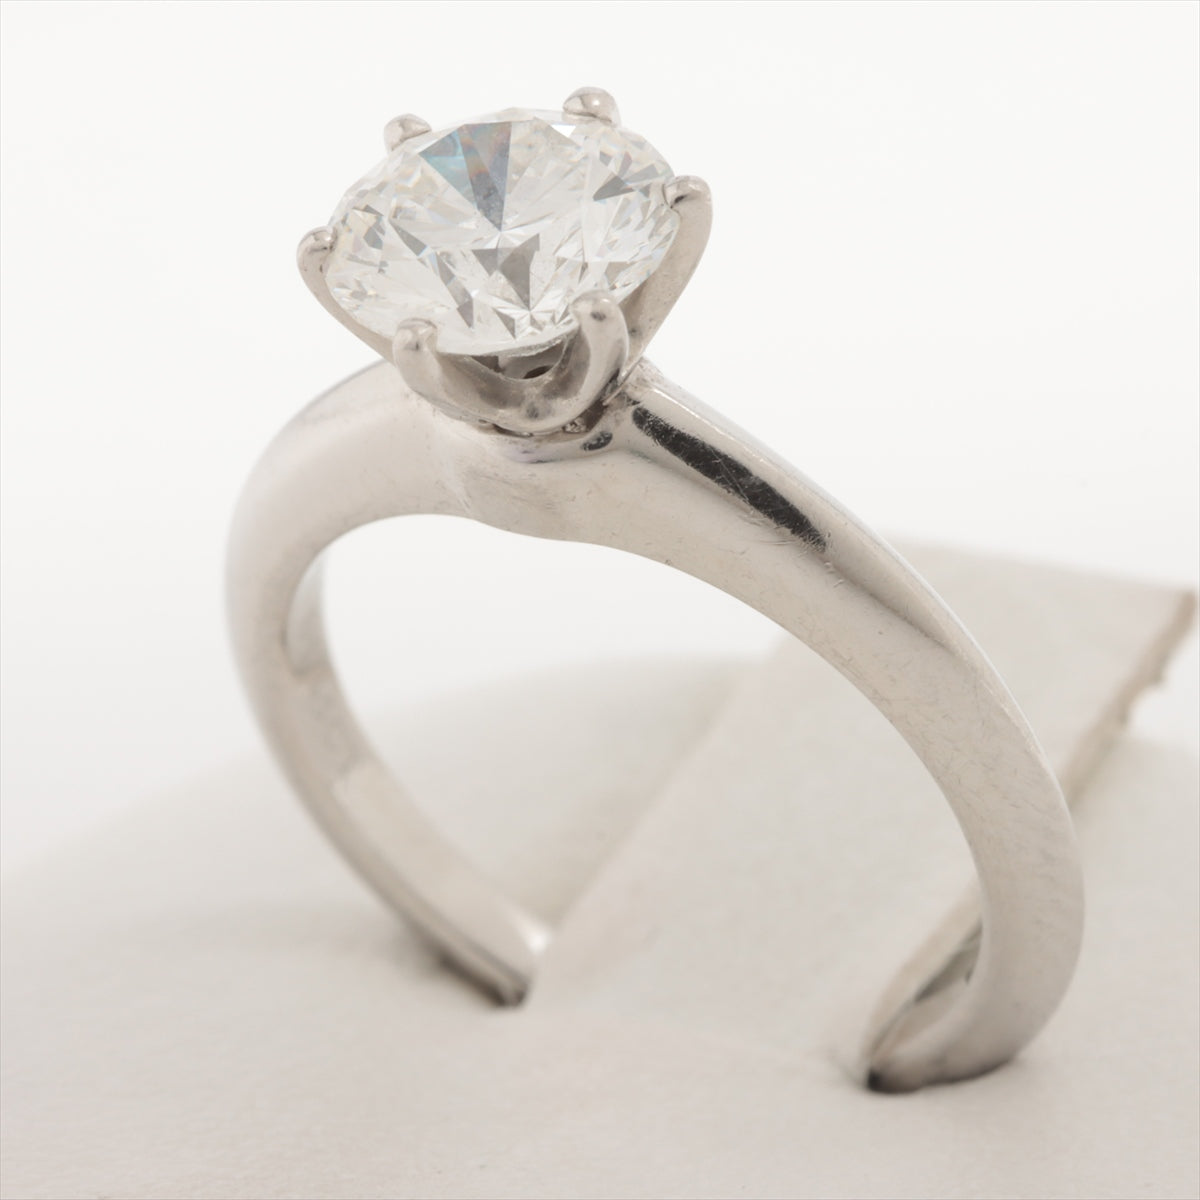 Tiffany Solitaire Diamond Ring Pt950 5.9g D1.45 G IF 3EX NONE